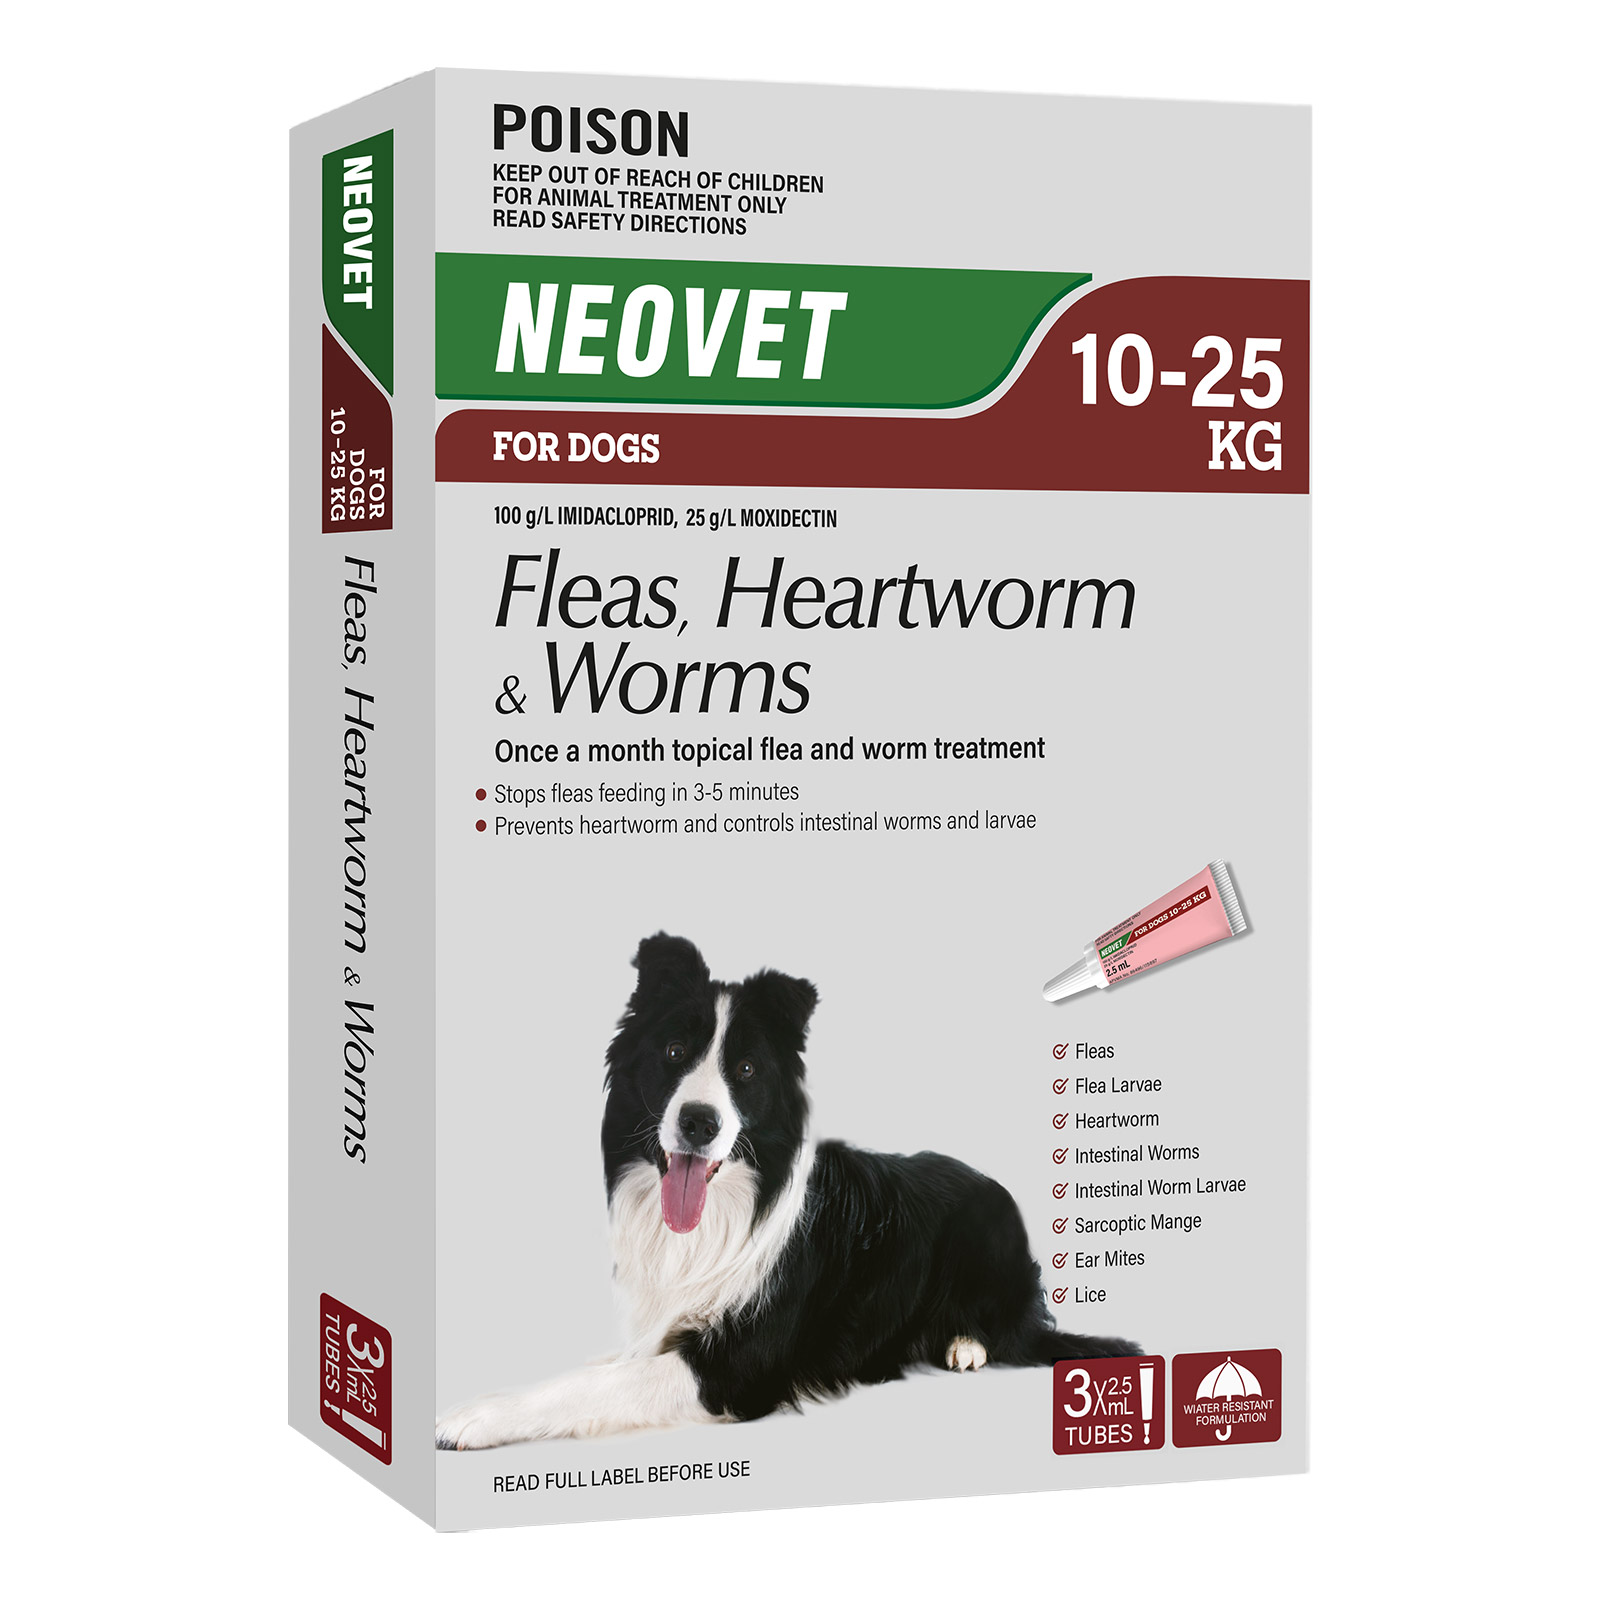 Neovet Spot-On For Large Dogs 22 To 55.1lbs (Red) 3 Pipettes
